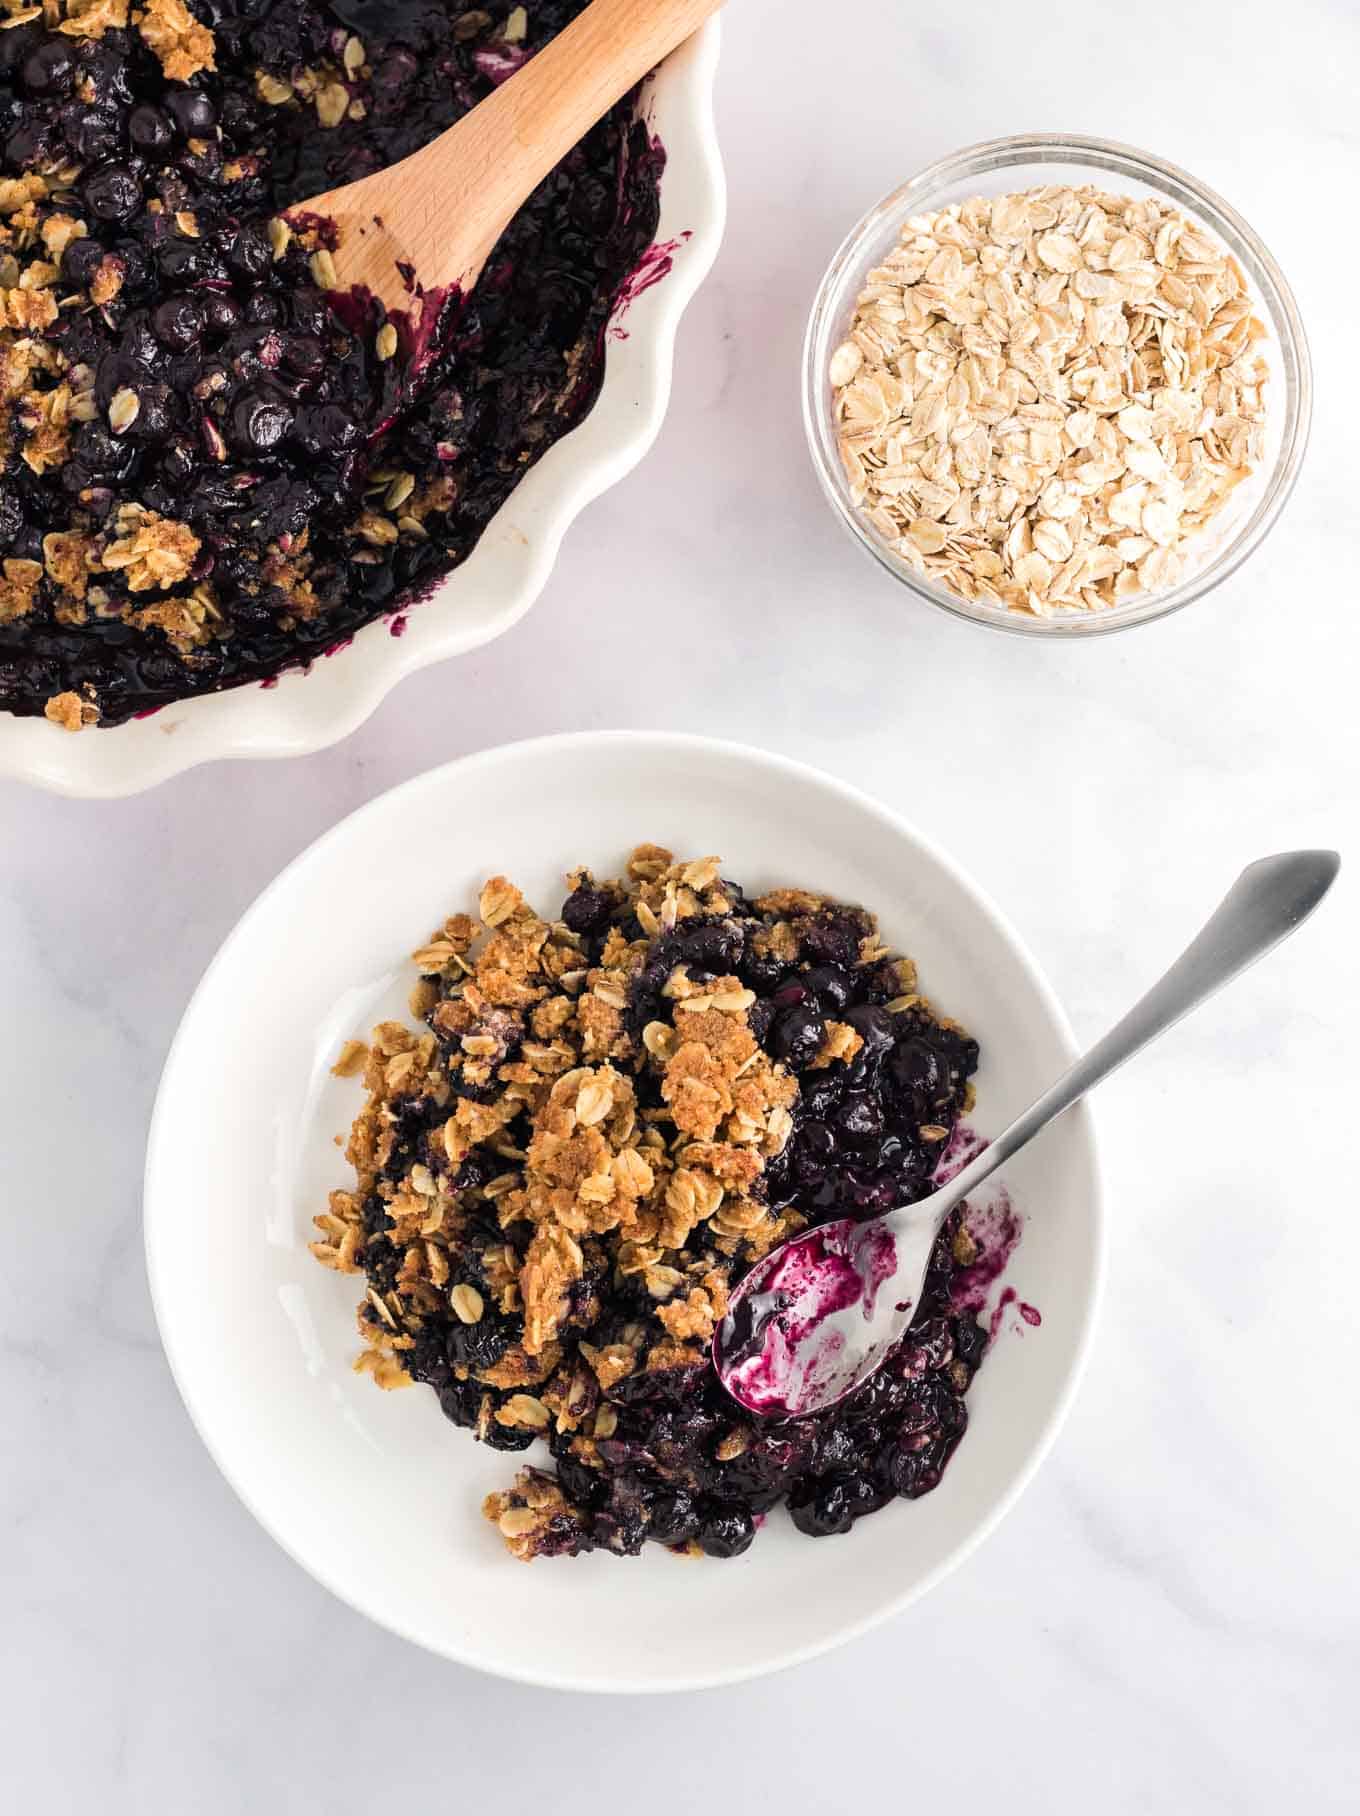 blueberry crisp in a white bowl with a silver spoon from an overhead view